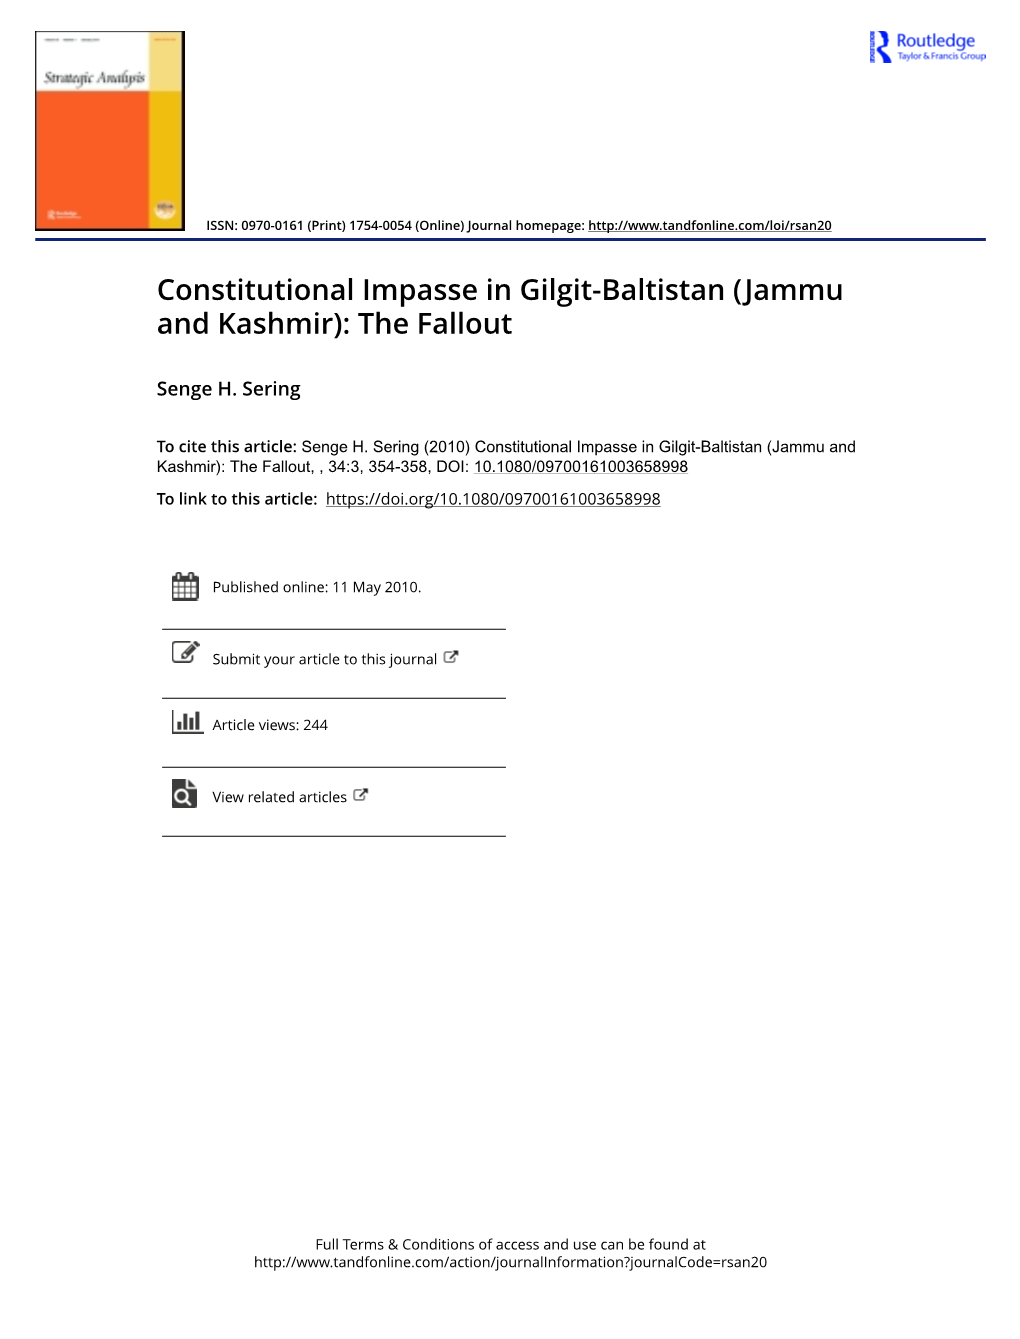 Constitutional Impasse in Gilgit-Baltistan (Jammu and Kashmir): the Fallout